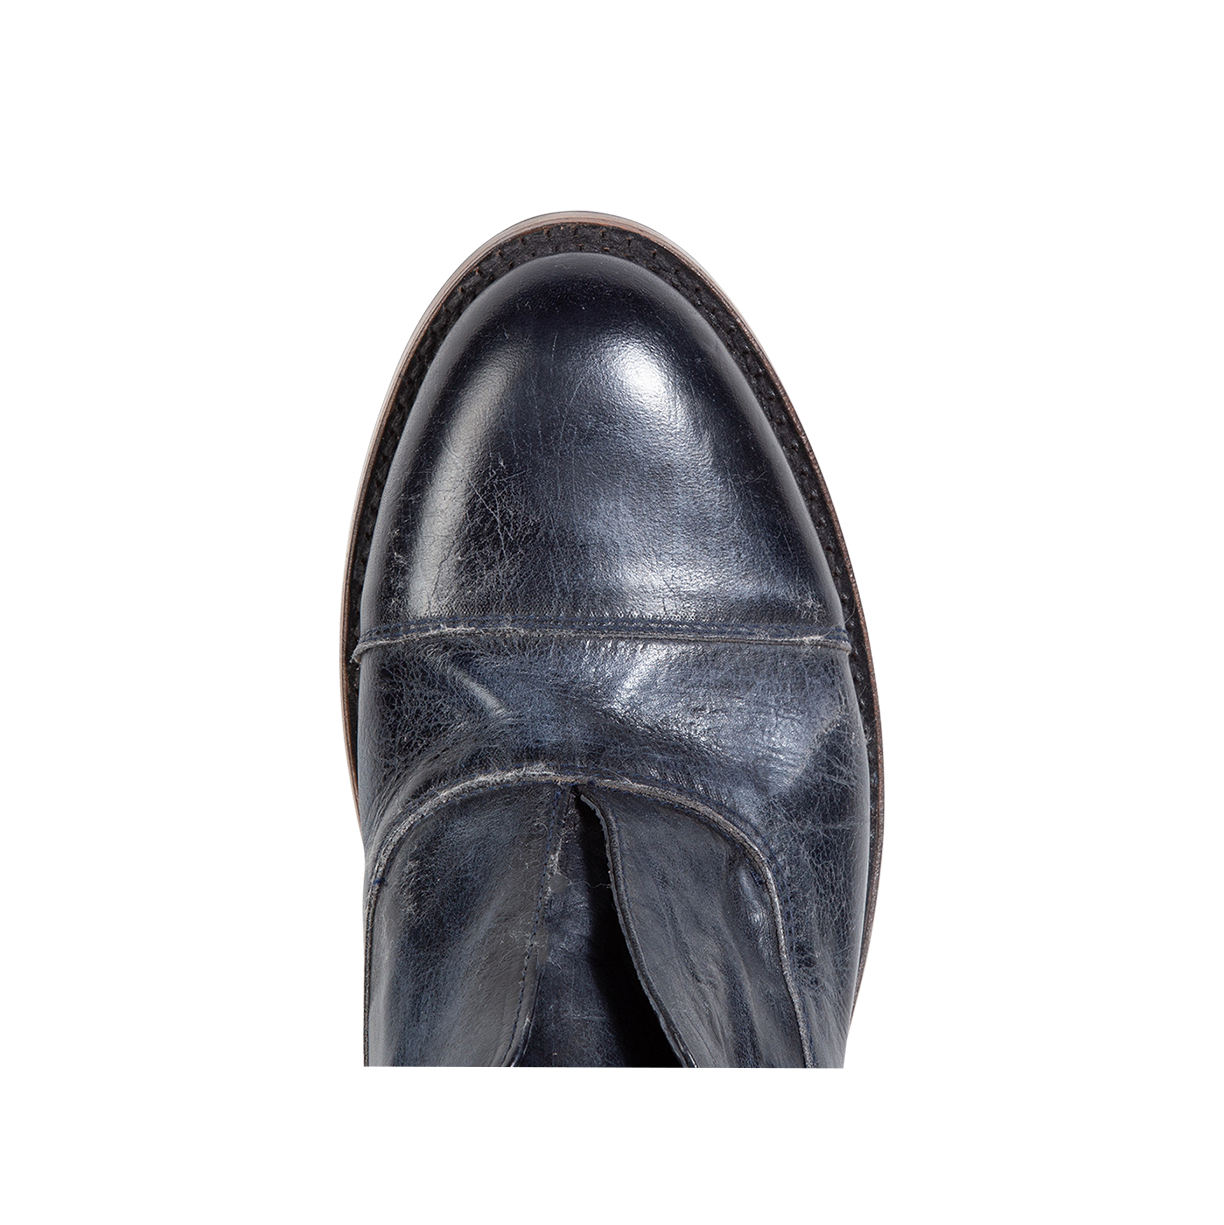 Top view showing almond toe and loafer construction on FREEBIRD men's Detrick navy shoe